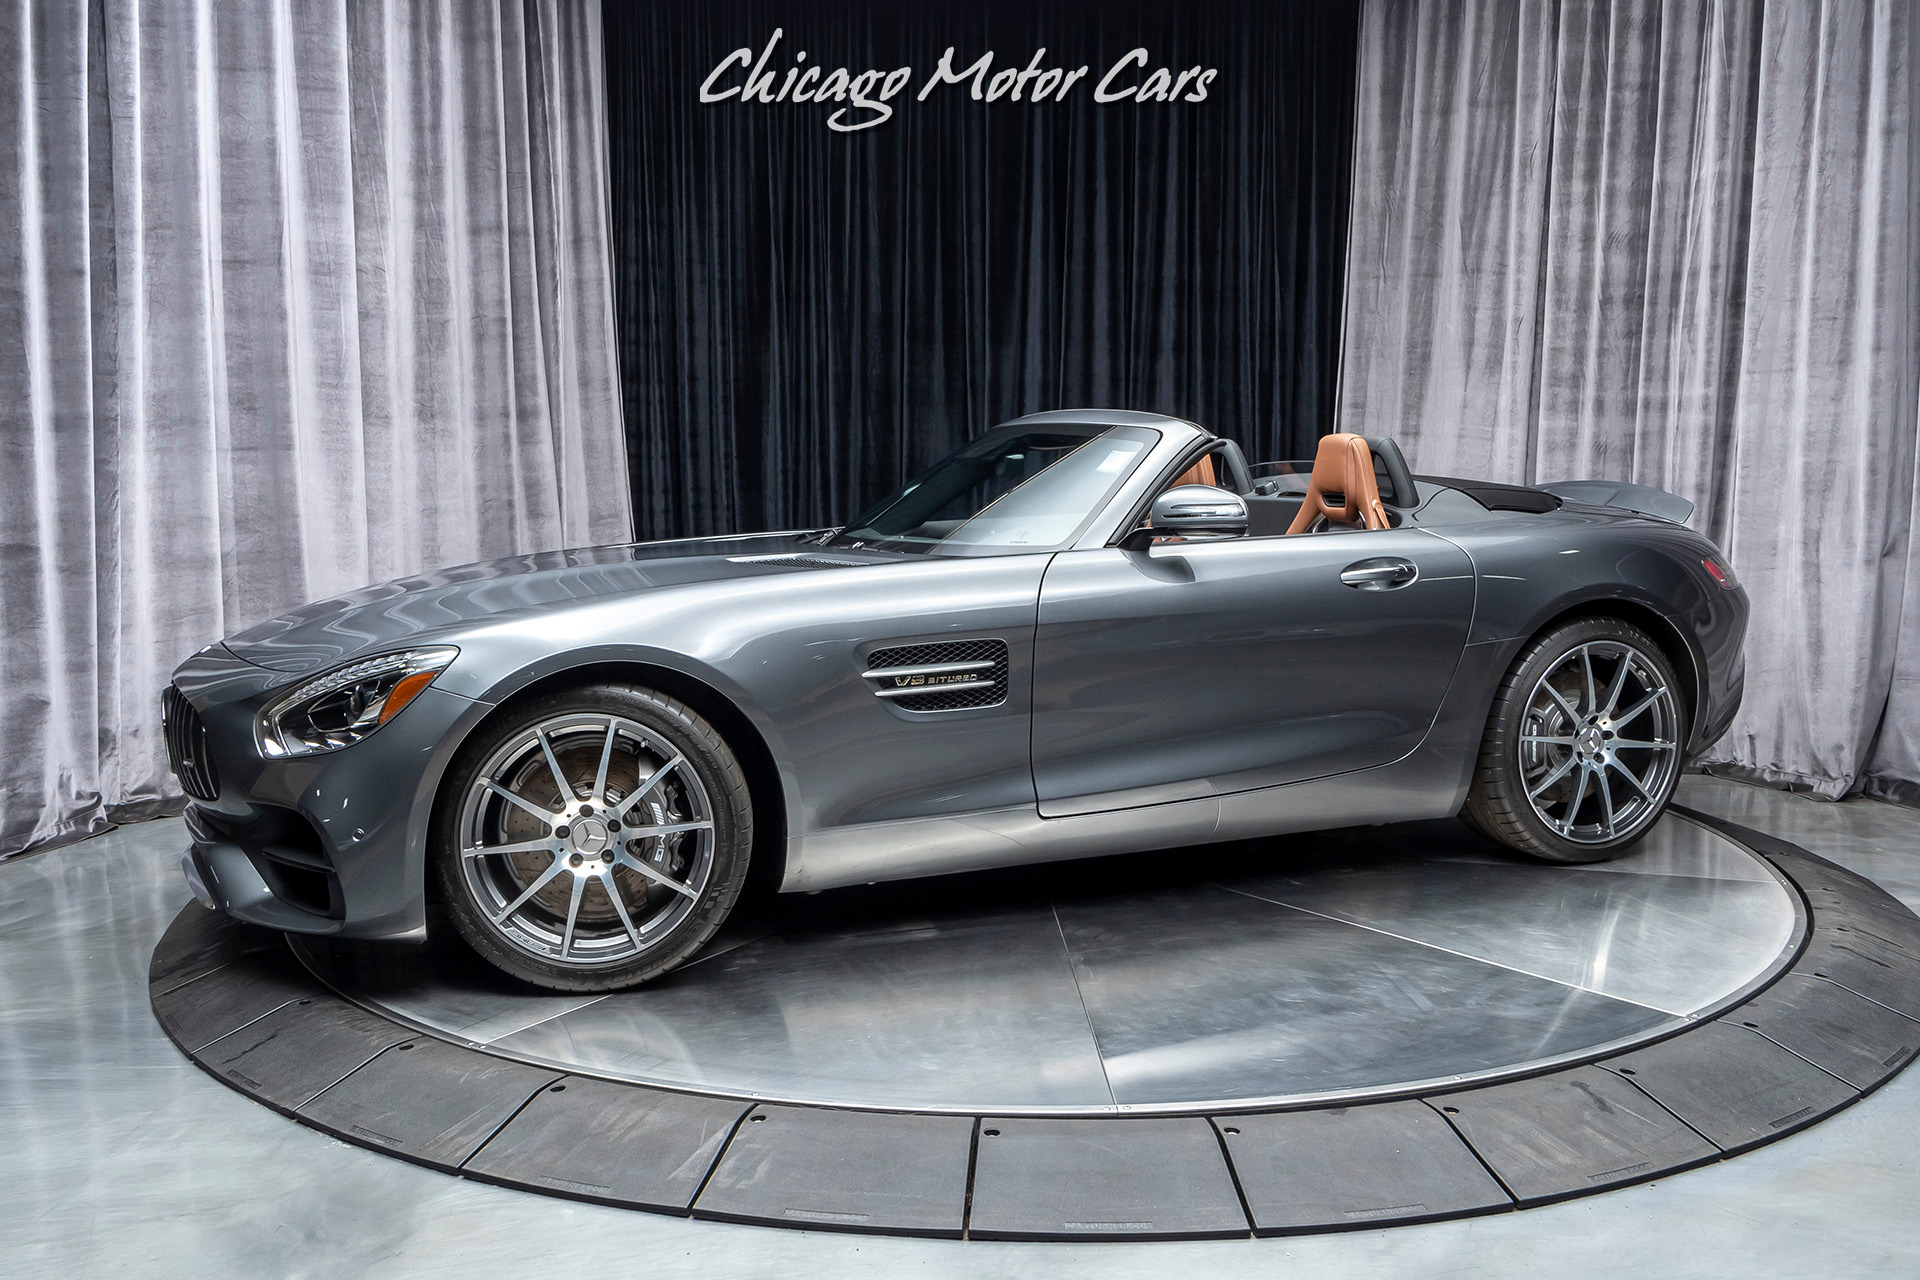 Used-2018-Mercedes-Benz-AMG-GTA-Roadster-Convertible-MSRP-139K-Exclusive-Package